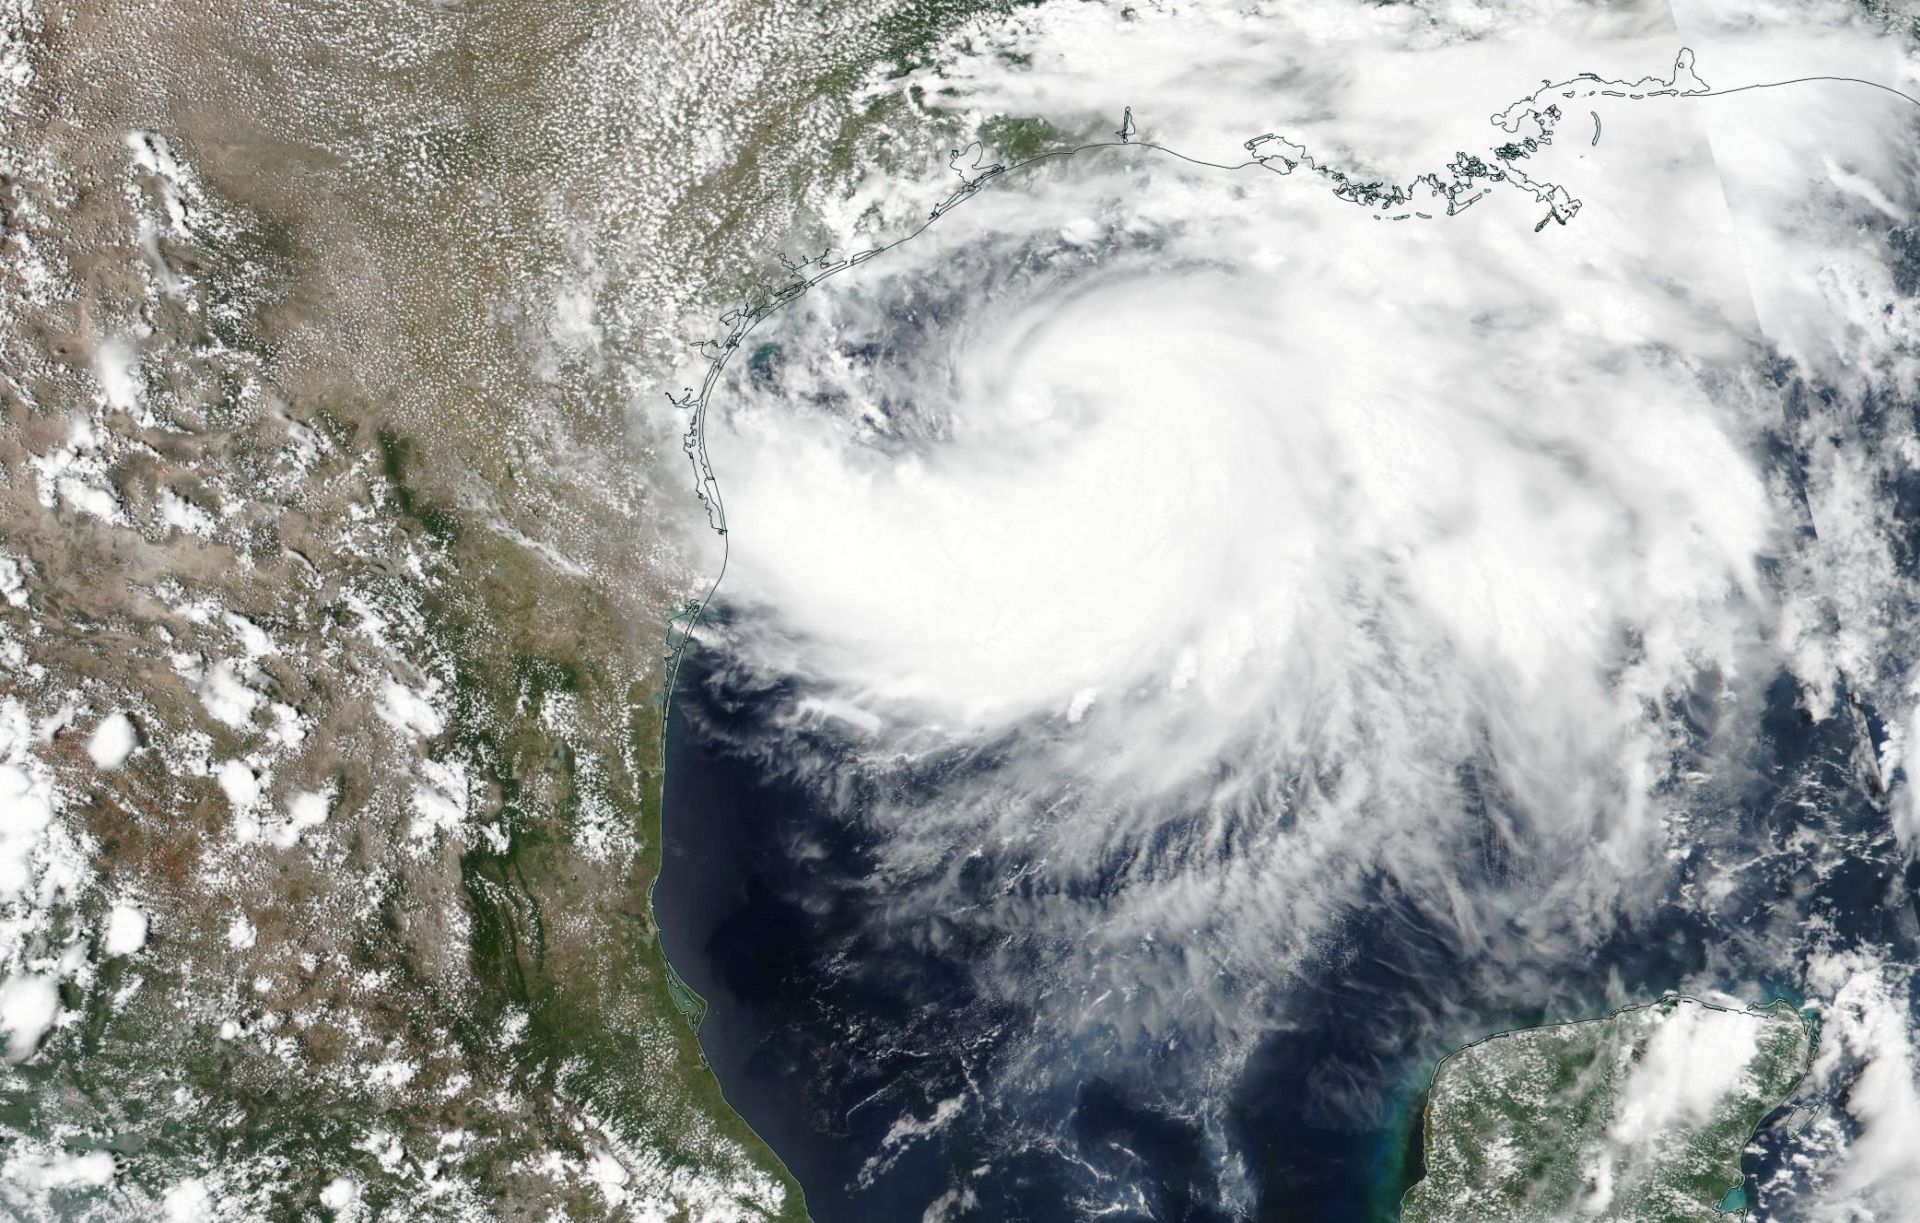 epa08565217 A handout satellite image made available by the National Aeronautics and Space Administration shows Tropical Storm Hanna as it moves trough the Gulf of Mexico and approaches Texas, 24 July 2020 (issued 25 July 2020). According to media reports, Tropical Storm Hanna is expected to reach hurricane strength upon making landfall in Texas by the eveing of 25 July local time.  EPA/NASA / HANDOUT  HANDOUT EDITORIAL USE ONLY/NO SALES